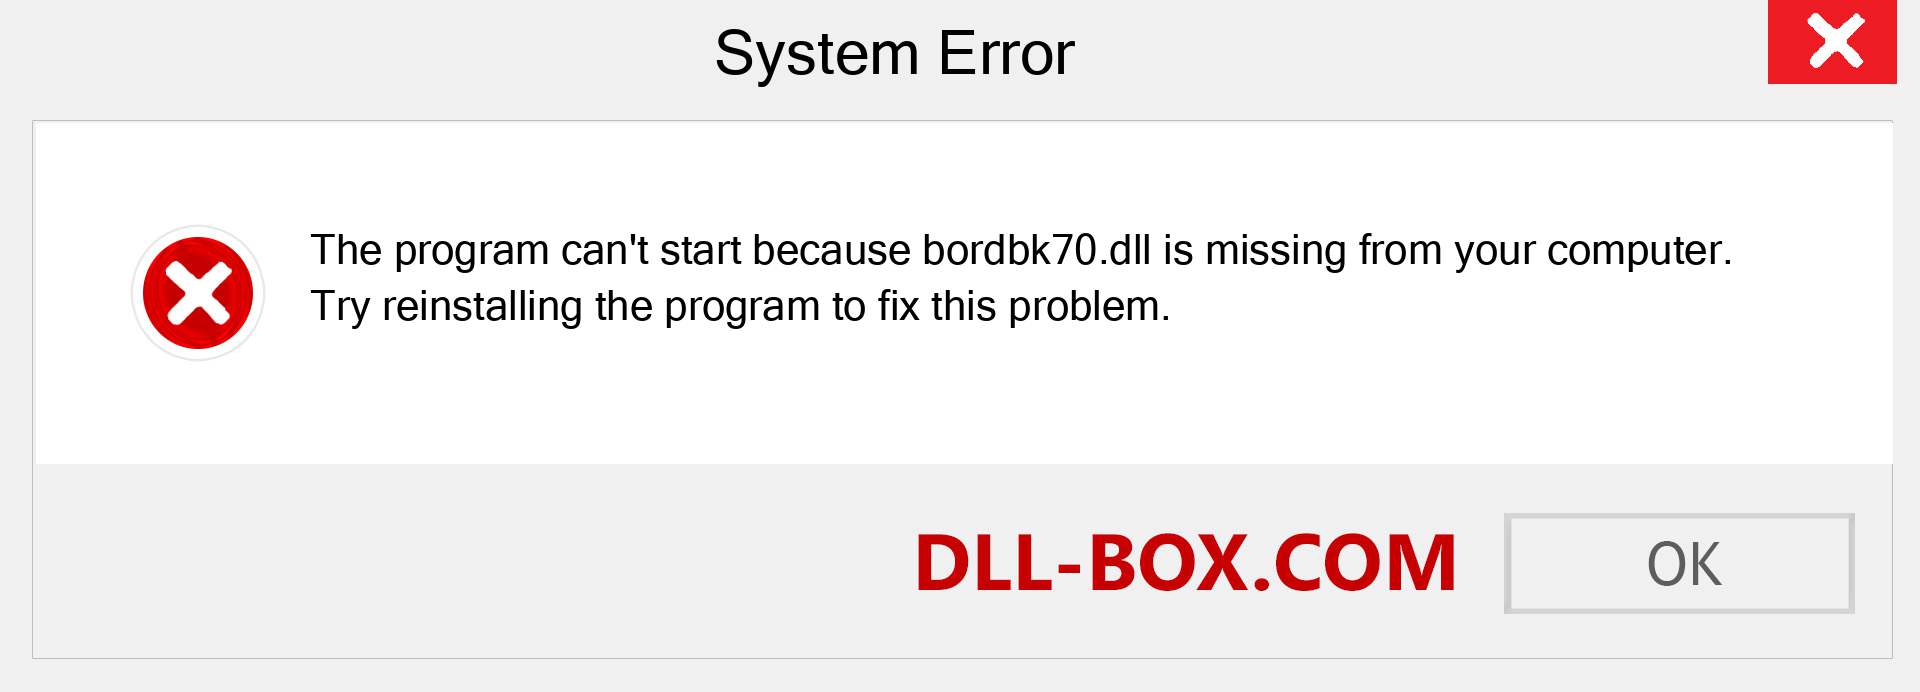  bordbk70.dll file is missing?. Download for Windows 7, 8, 10 - Fix  bordbk70 dll Missing Error on Windows, photos, images